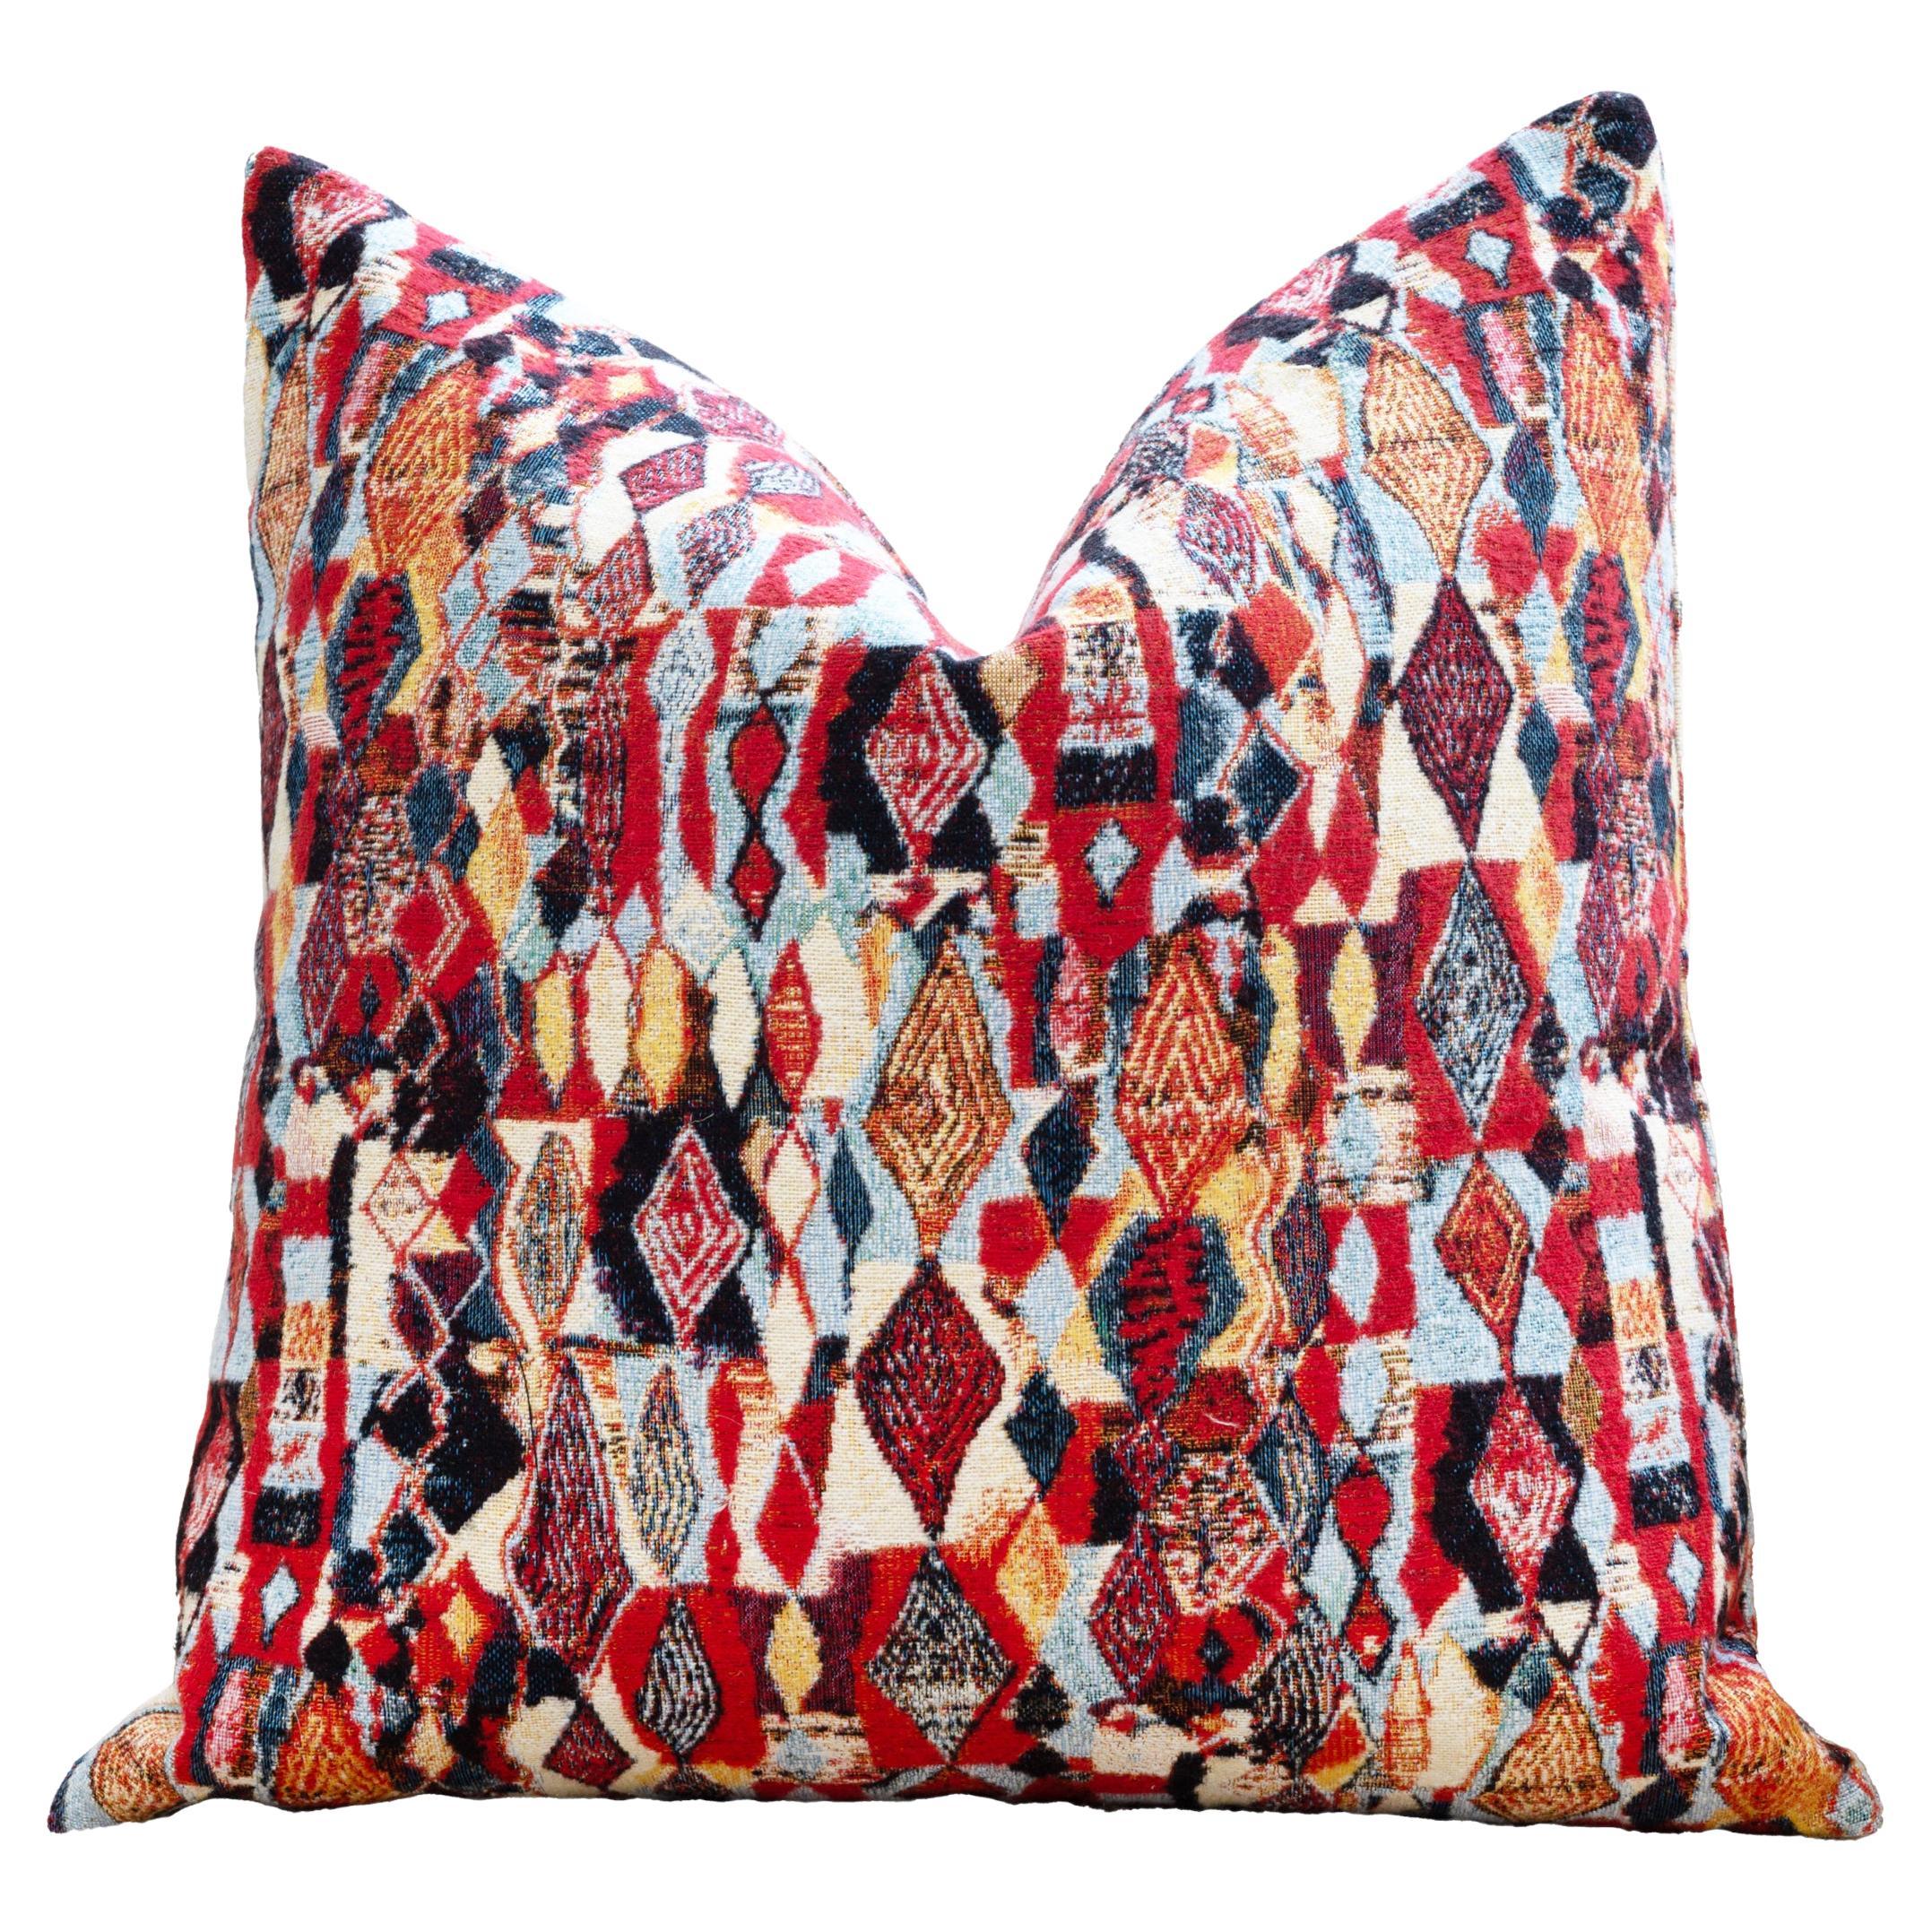 Velvet Collage Pillows by Nicholas Wolfe